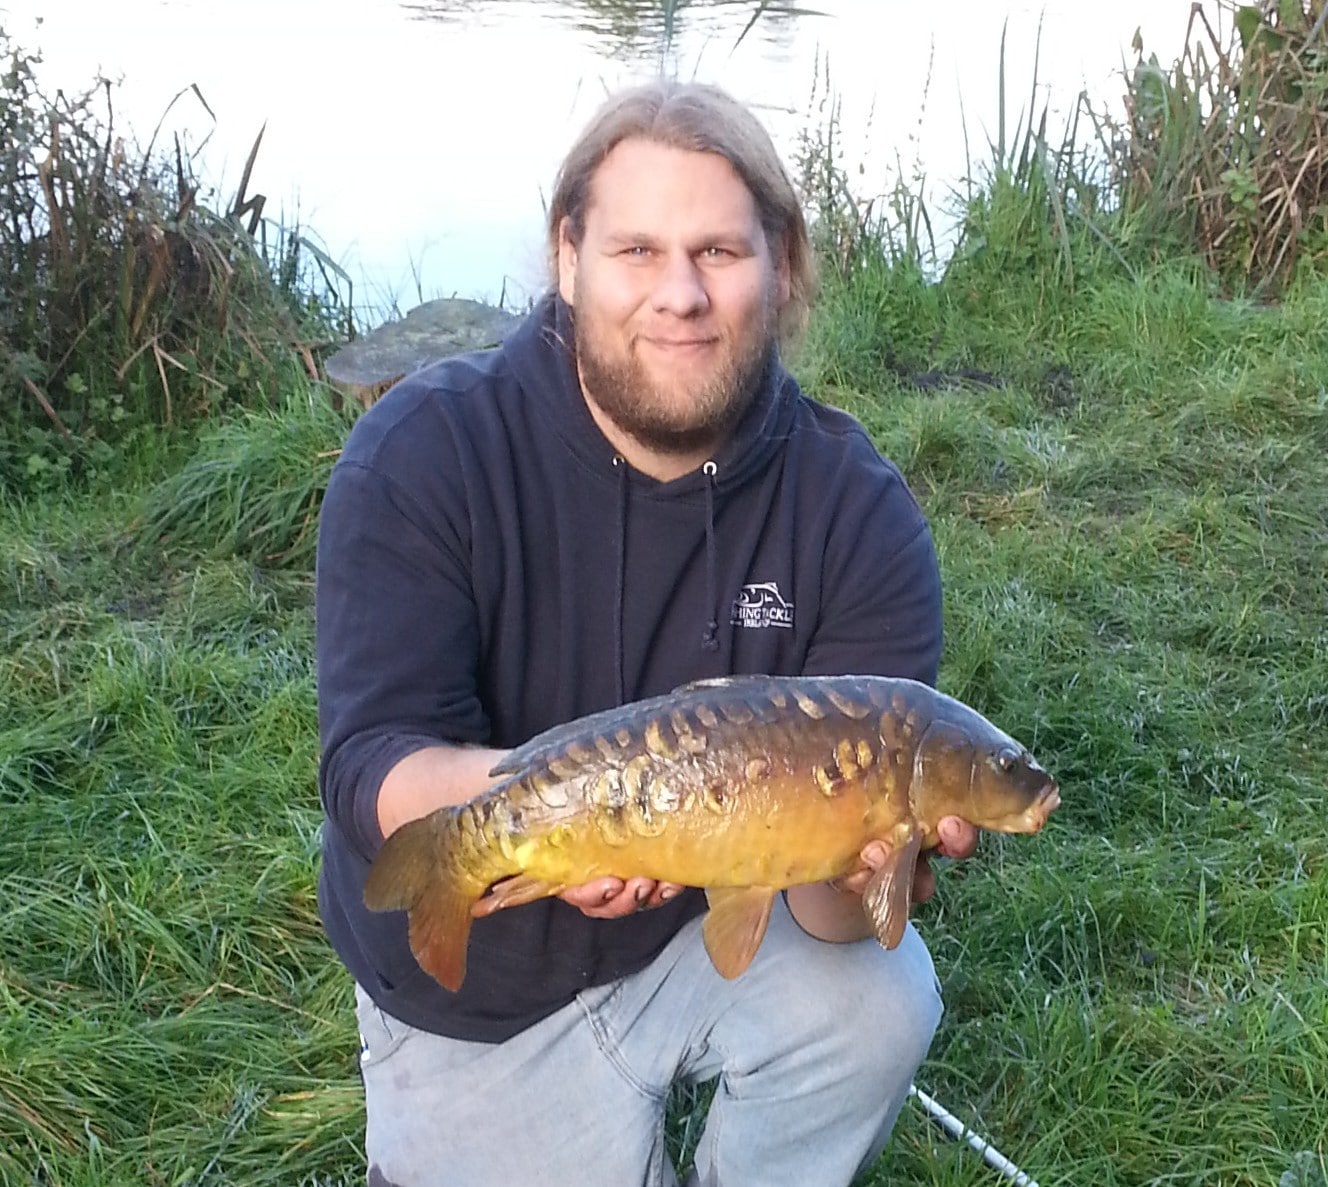 Superb fishing for Co. Clare club at Anglegrove lake with Carp up to 10lbs  and tip top Koi too